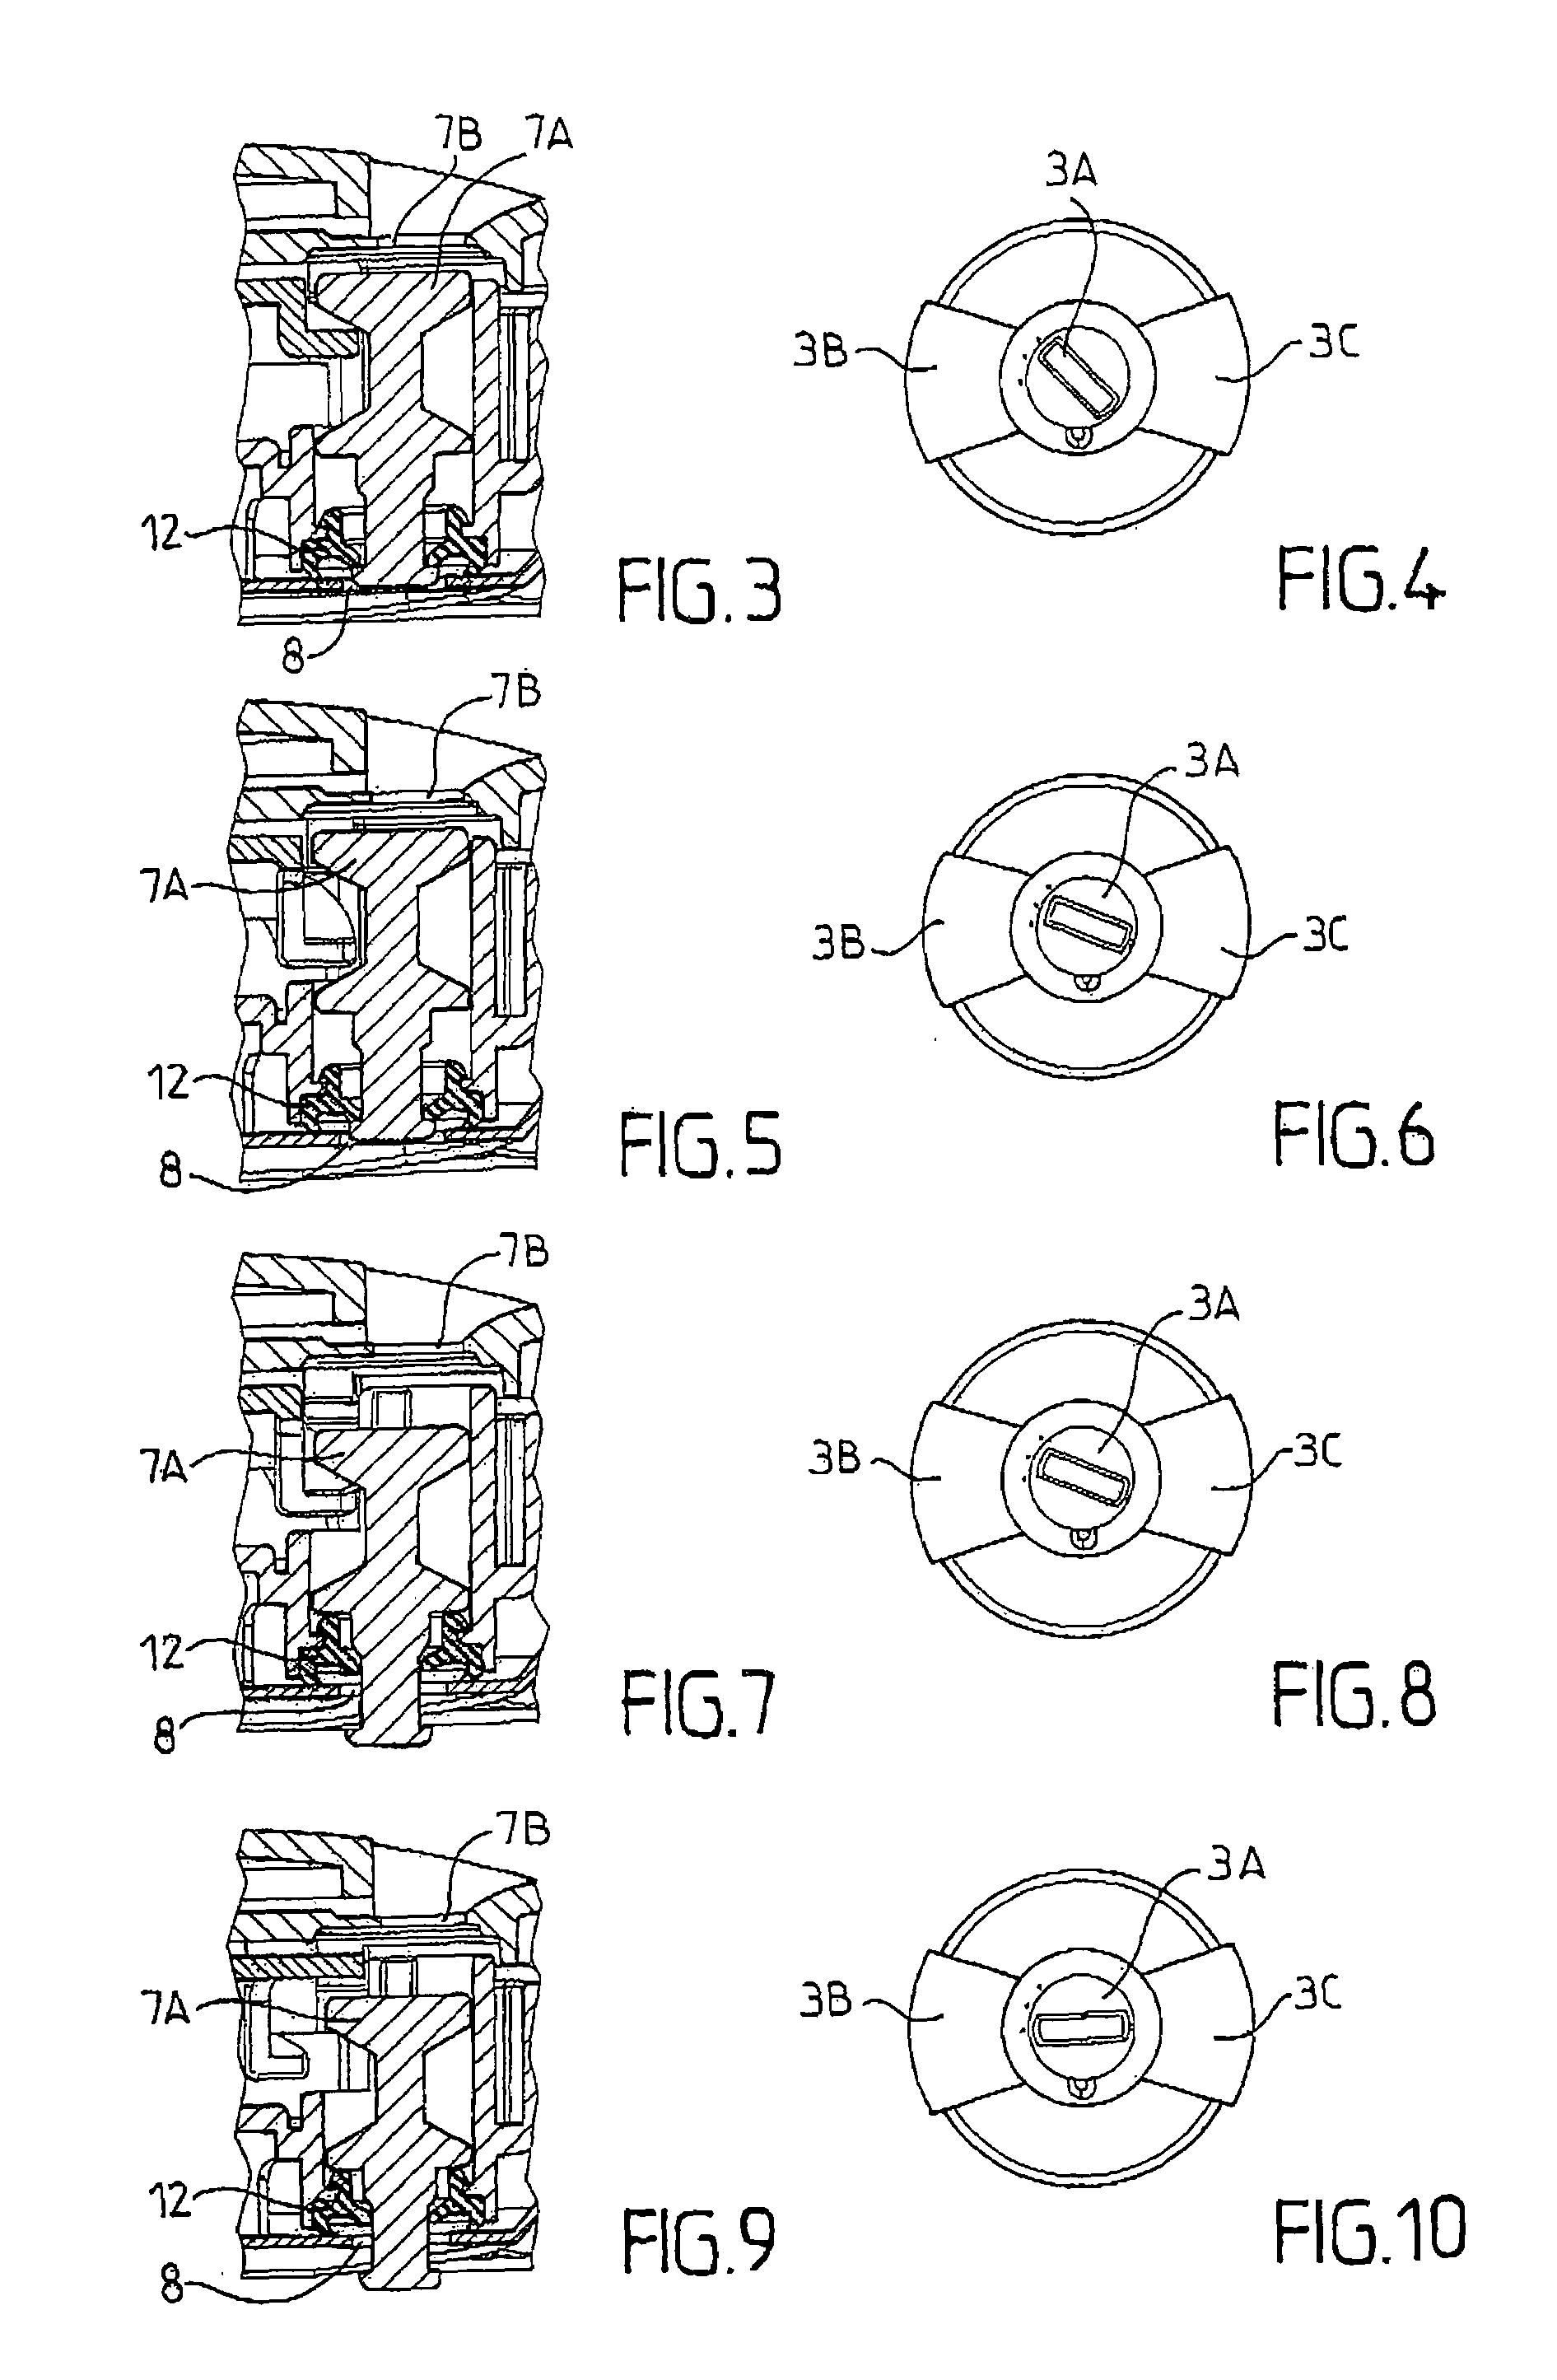 Appliance for cooking food under pressure